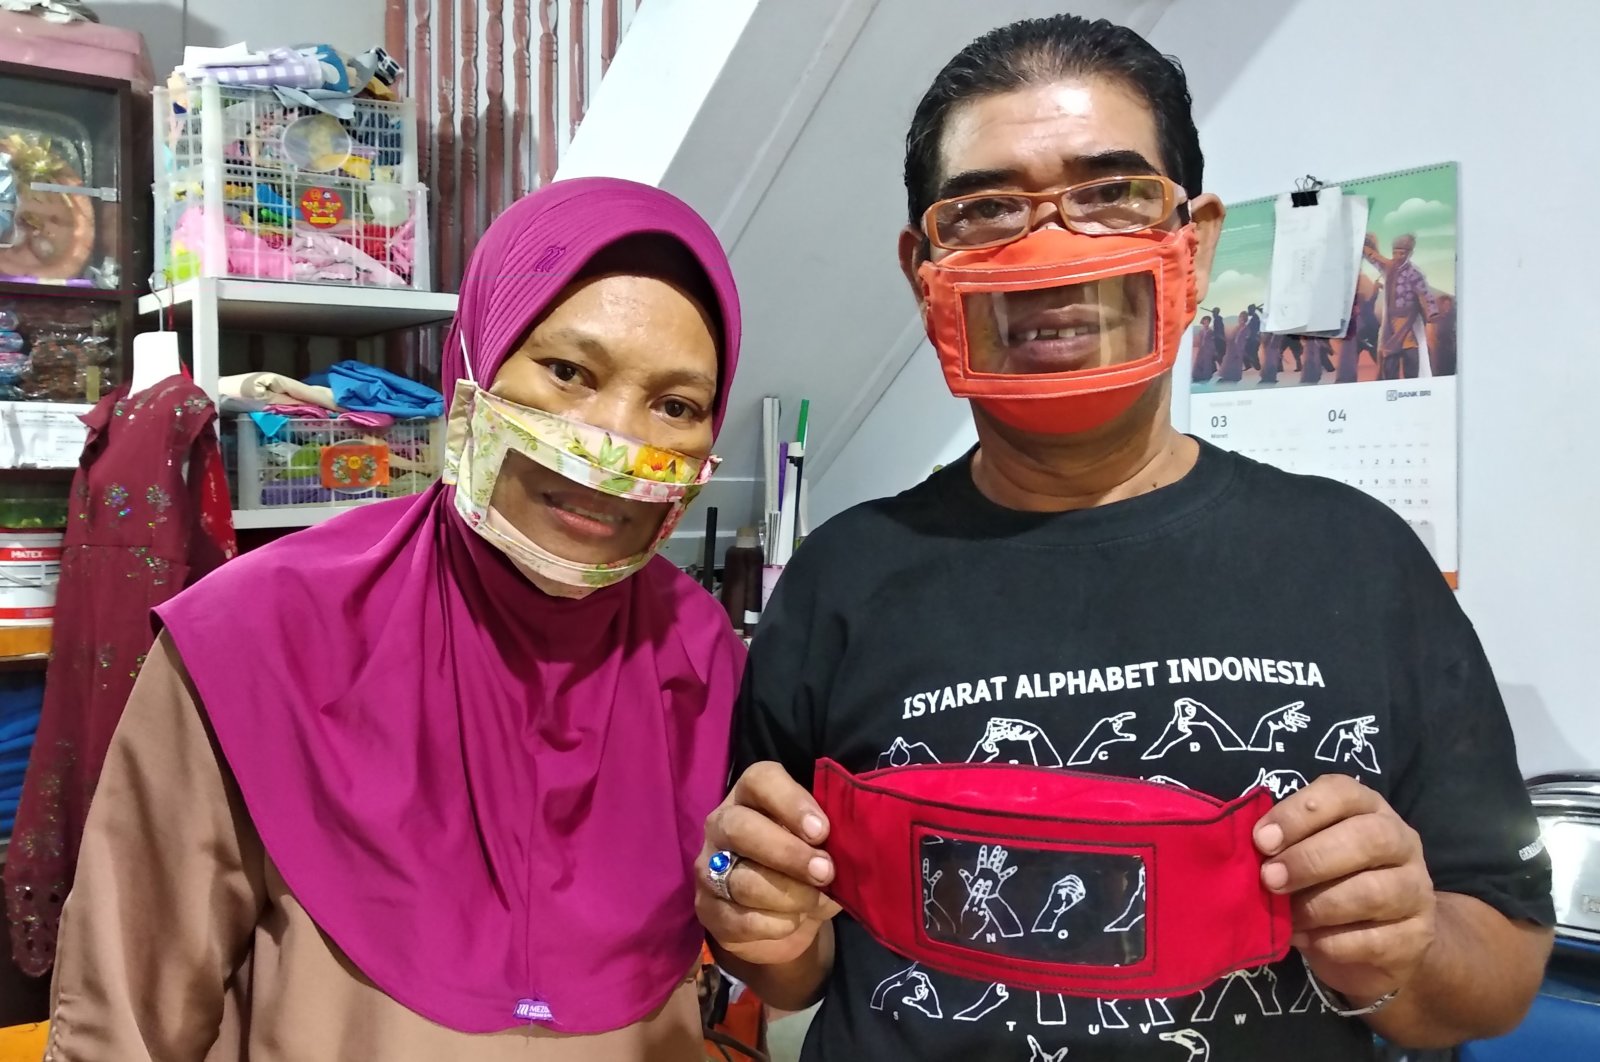 Imama Saroso (R) and his wife Faizah Badaruddin (L), who are hearing and speech-impaired, pose with homemade face masks which enable people with disabilities like them to read lips when communicating, in Makassar, South Sulawesi, April 28, 2020. (AFP Photo)